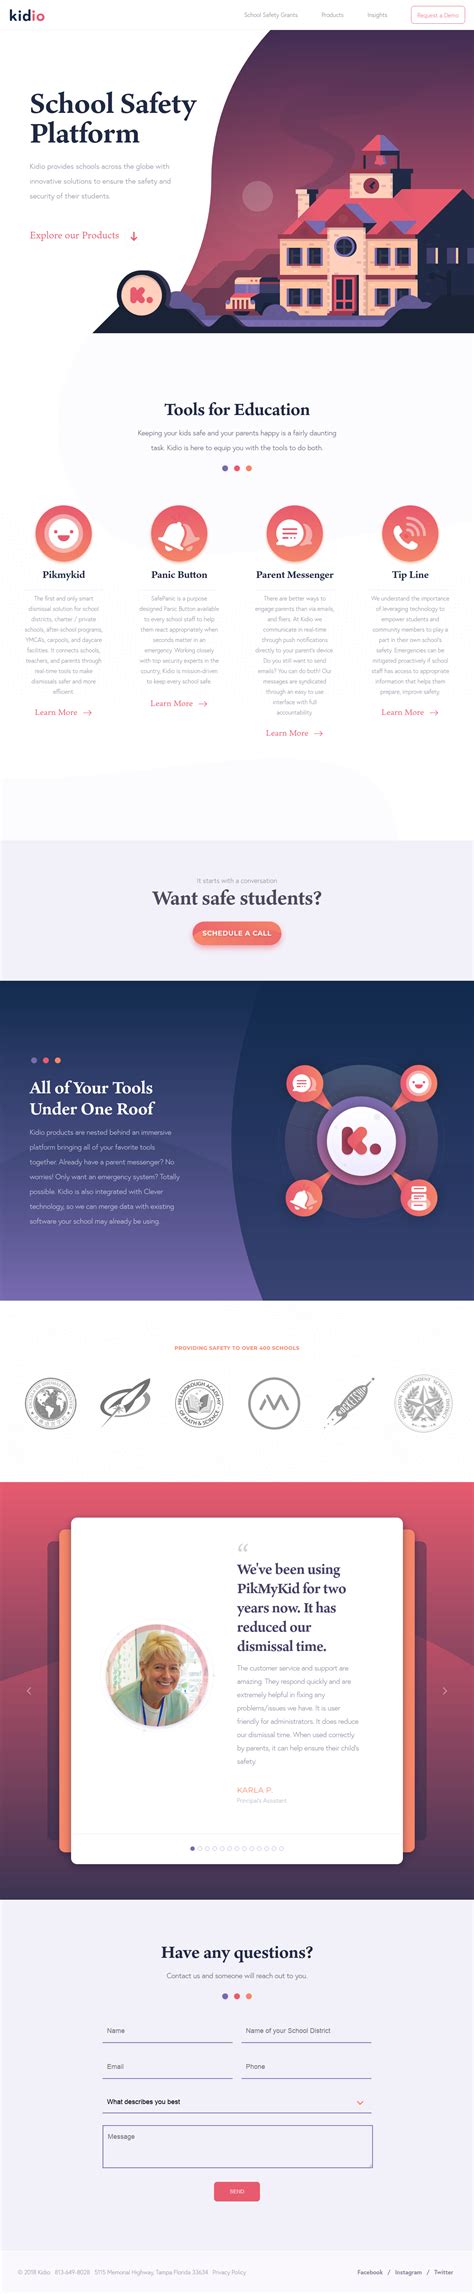 Landing Page Example: kid.io | Landing page examples, Landing page ...